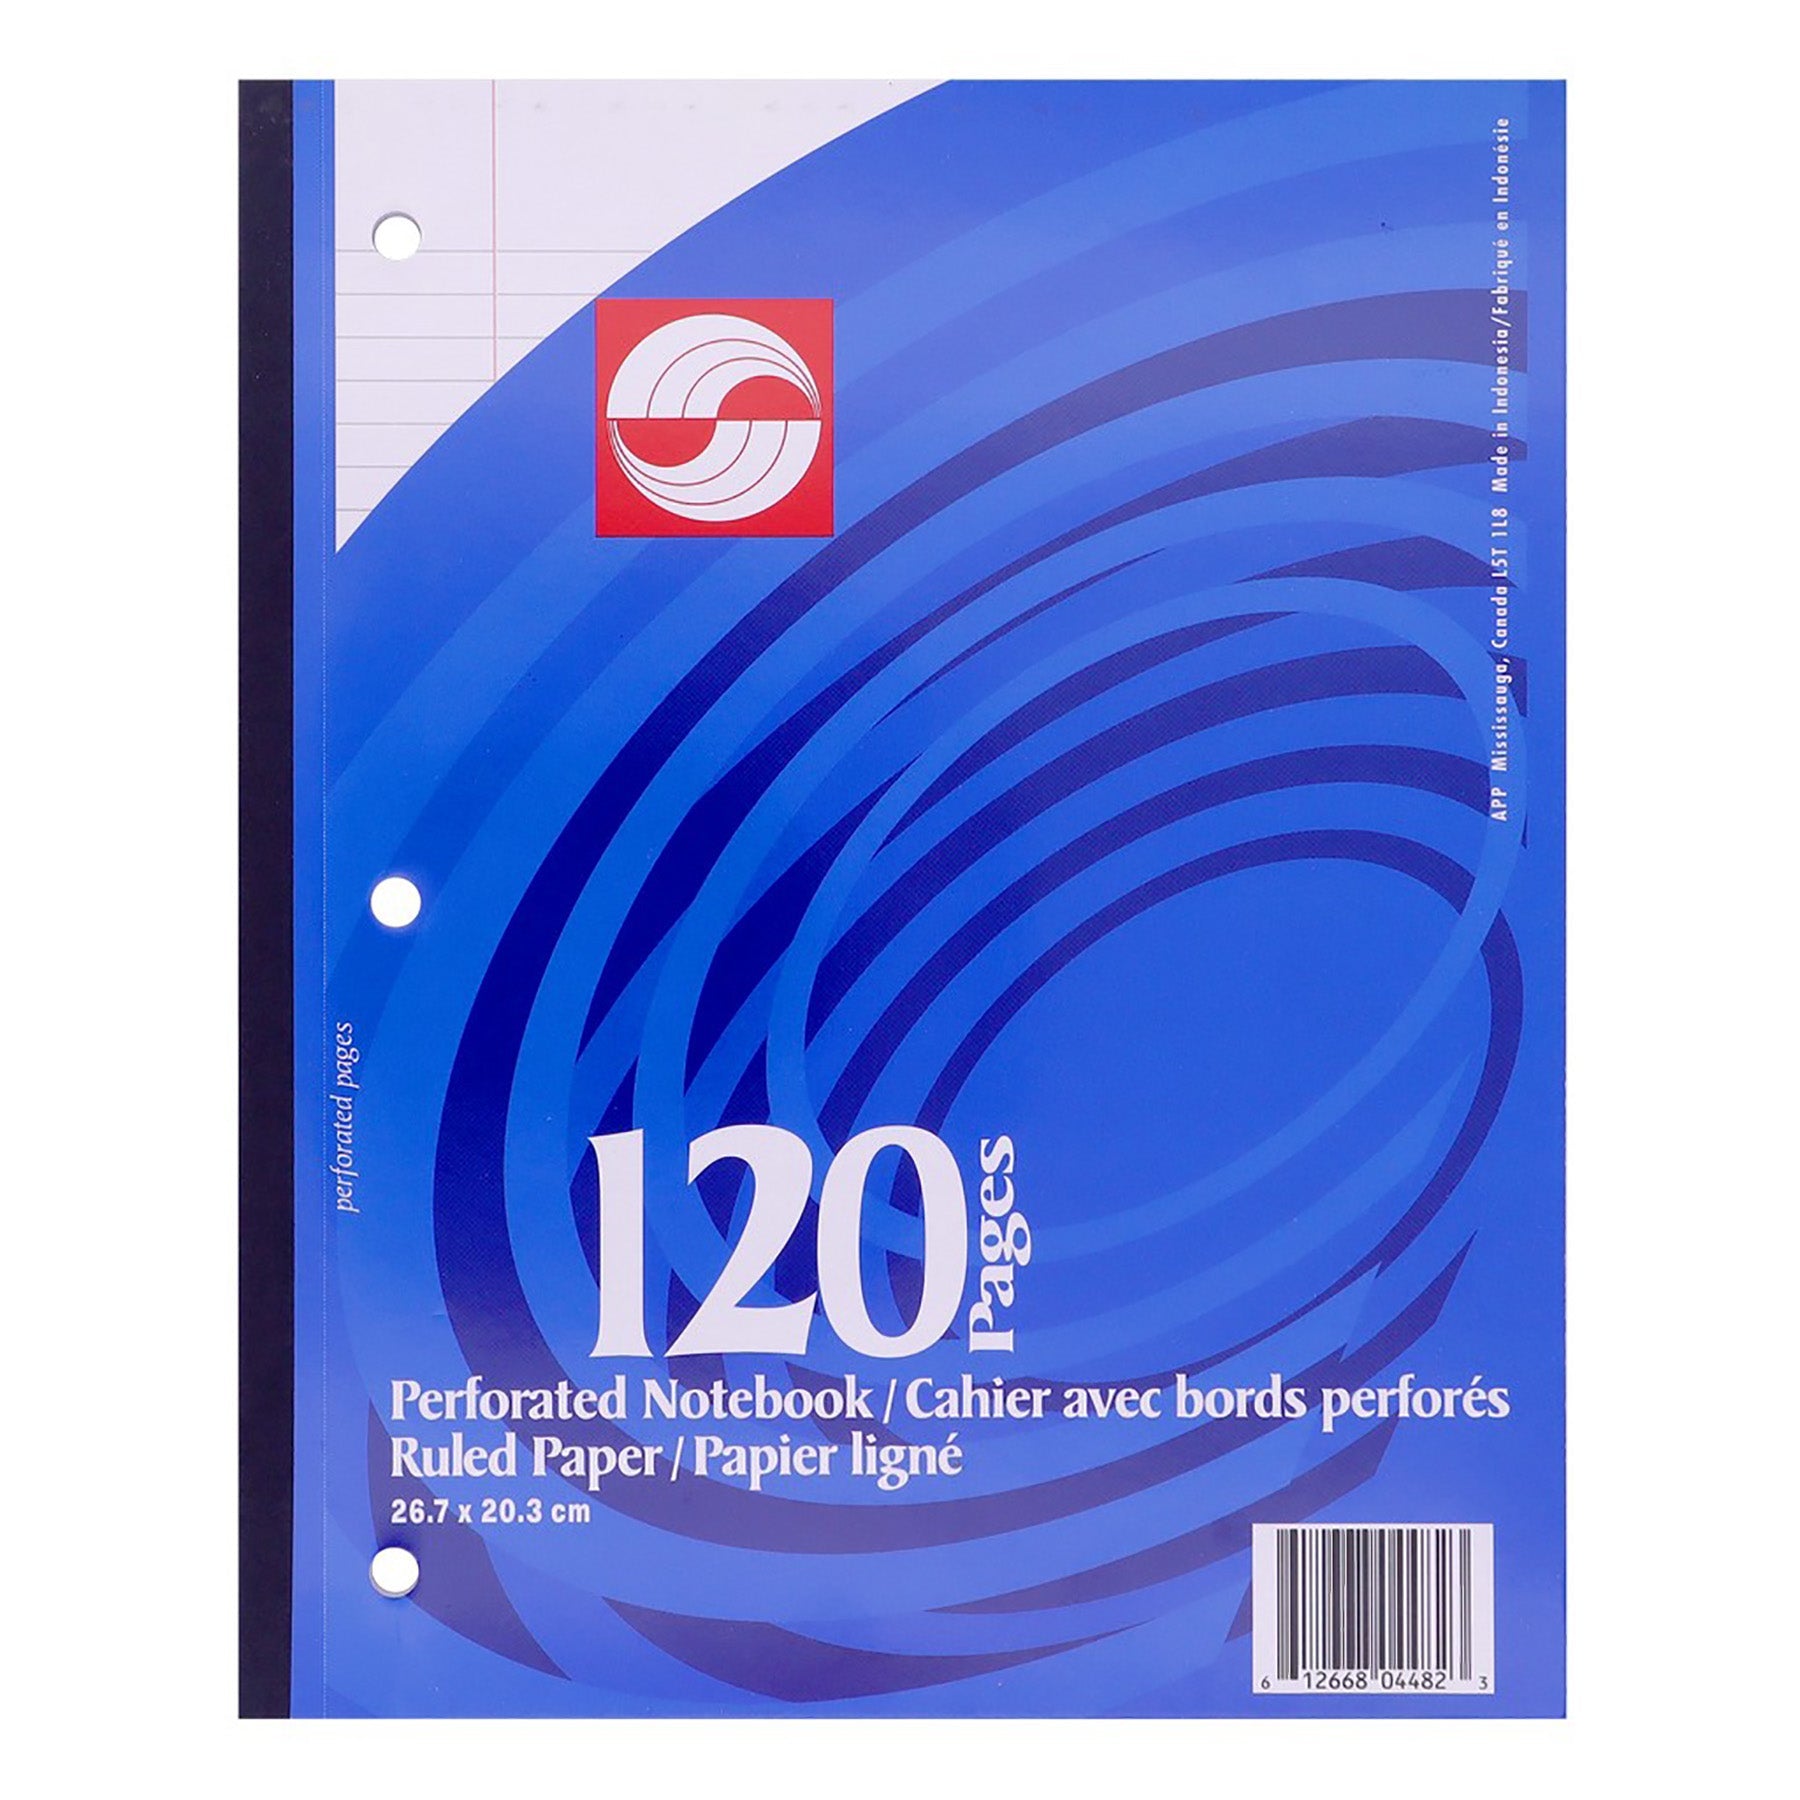 APP Perforated Notebook 120 Lined Pages 10.5x8in